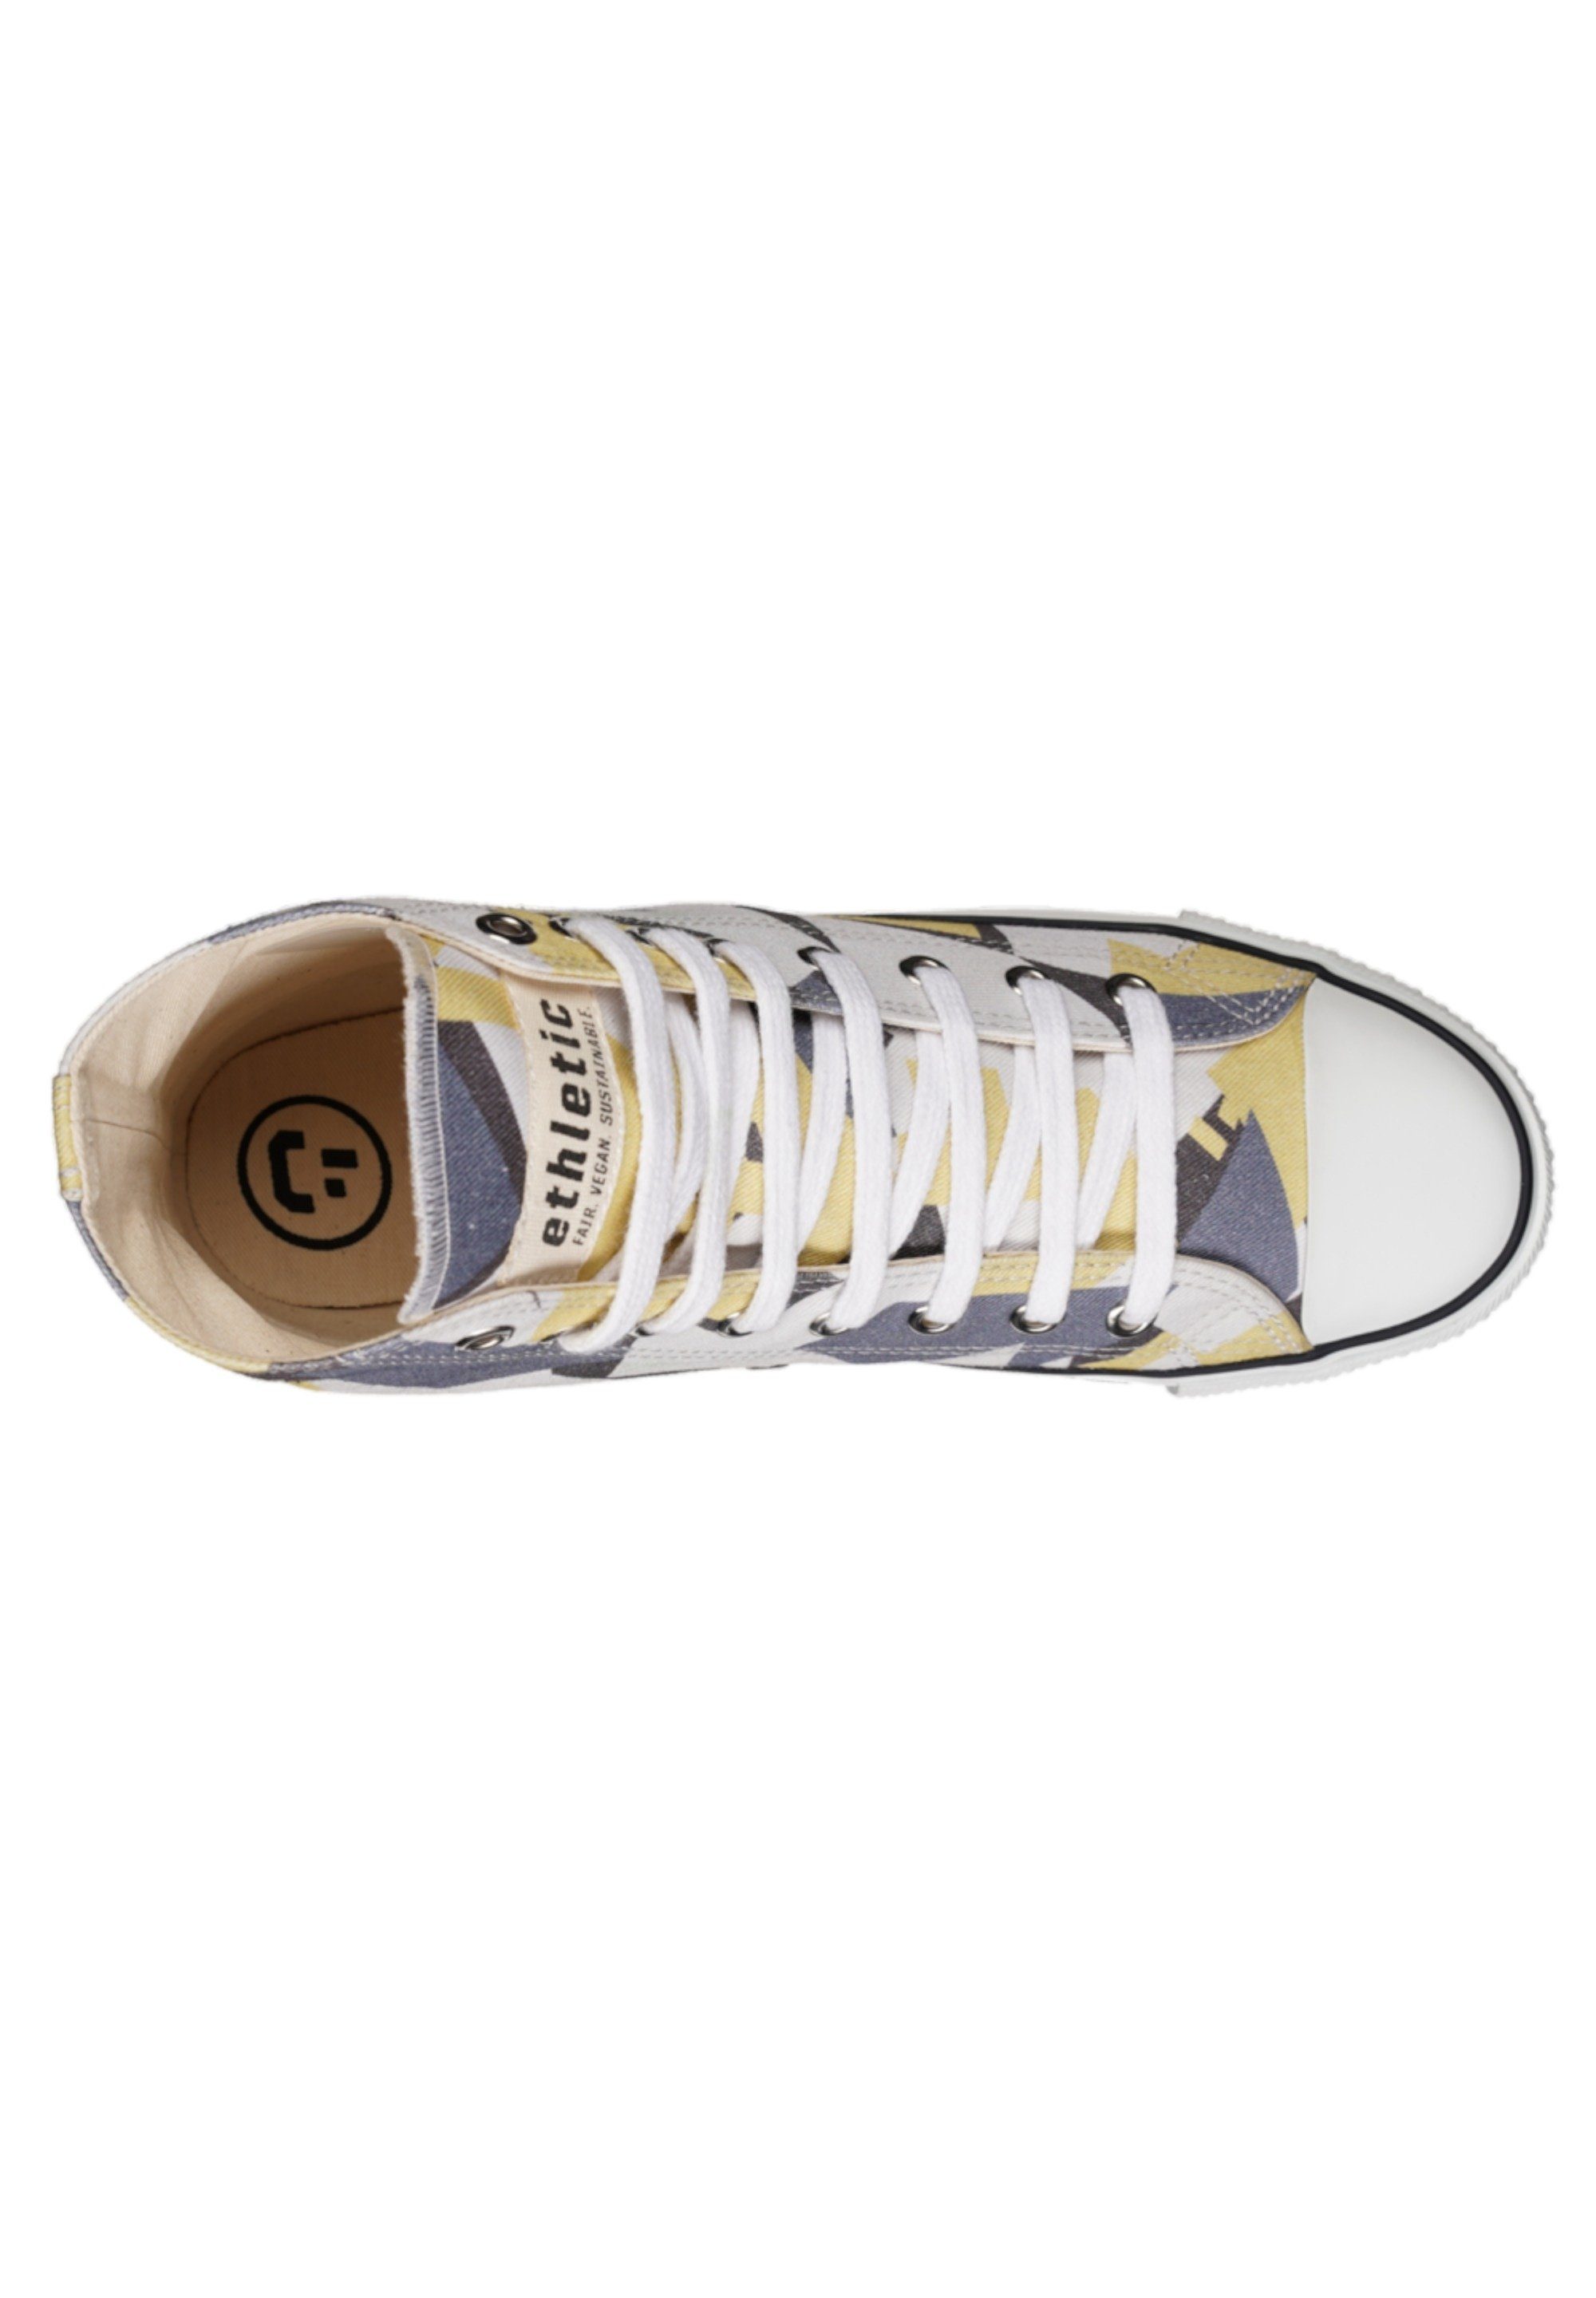 ETHLETIC White Hi Produkt Fairtrade White Yellow Sneaker Cut Just Cap Camou 